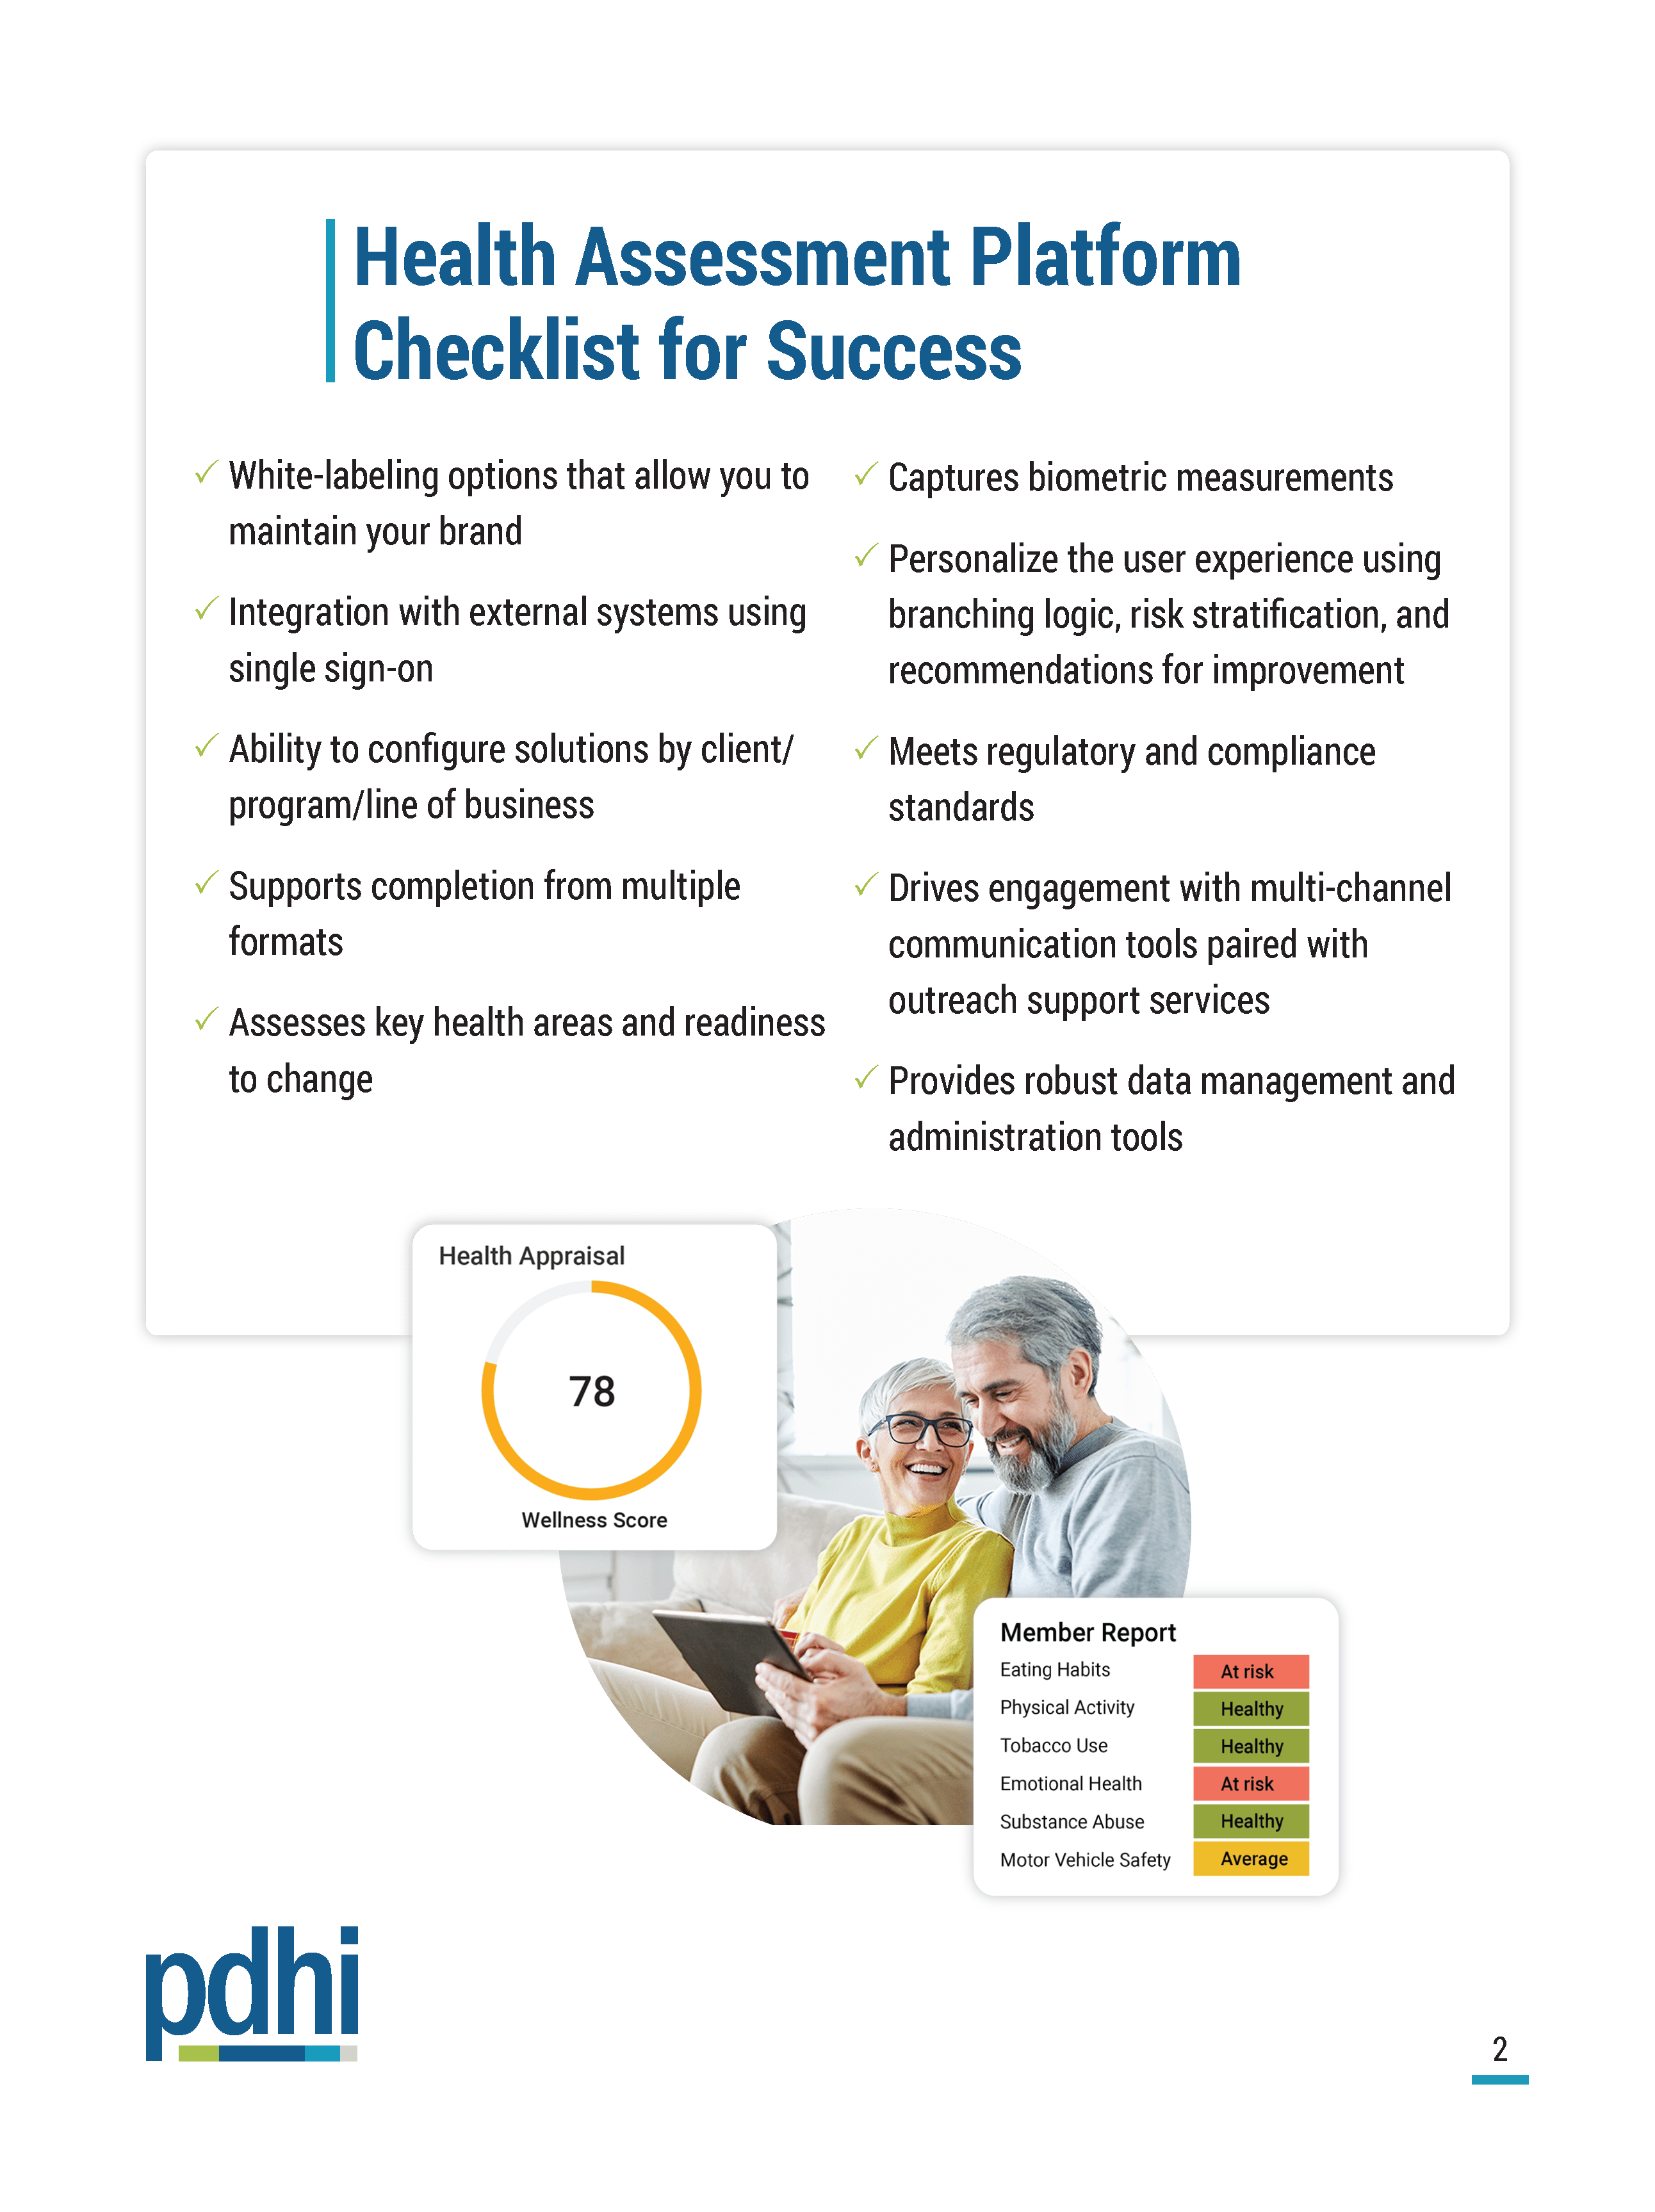 10 Things to Look For in a Health Assessment Platform Cover Page